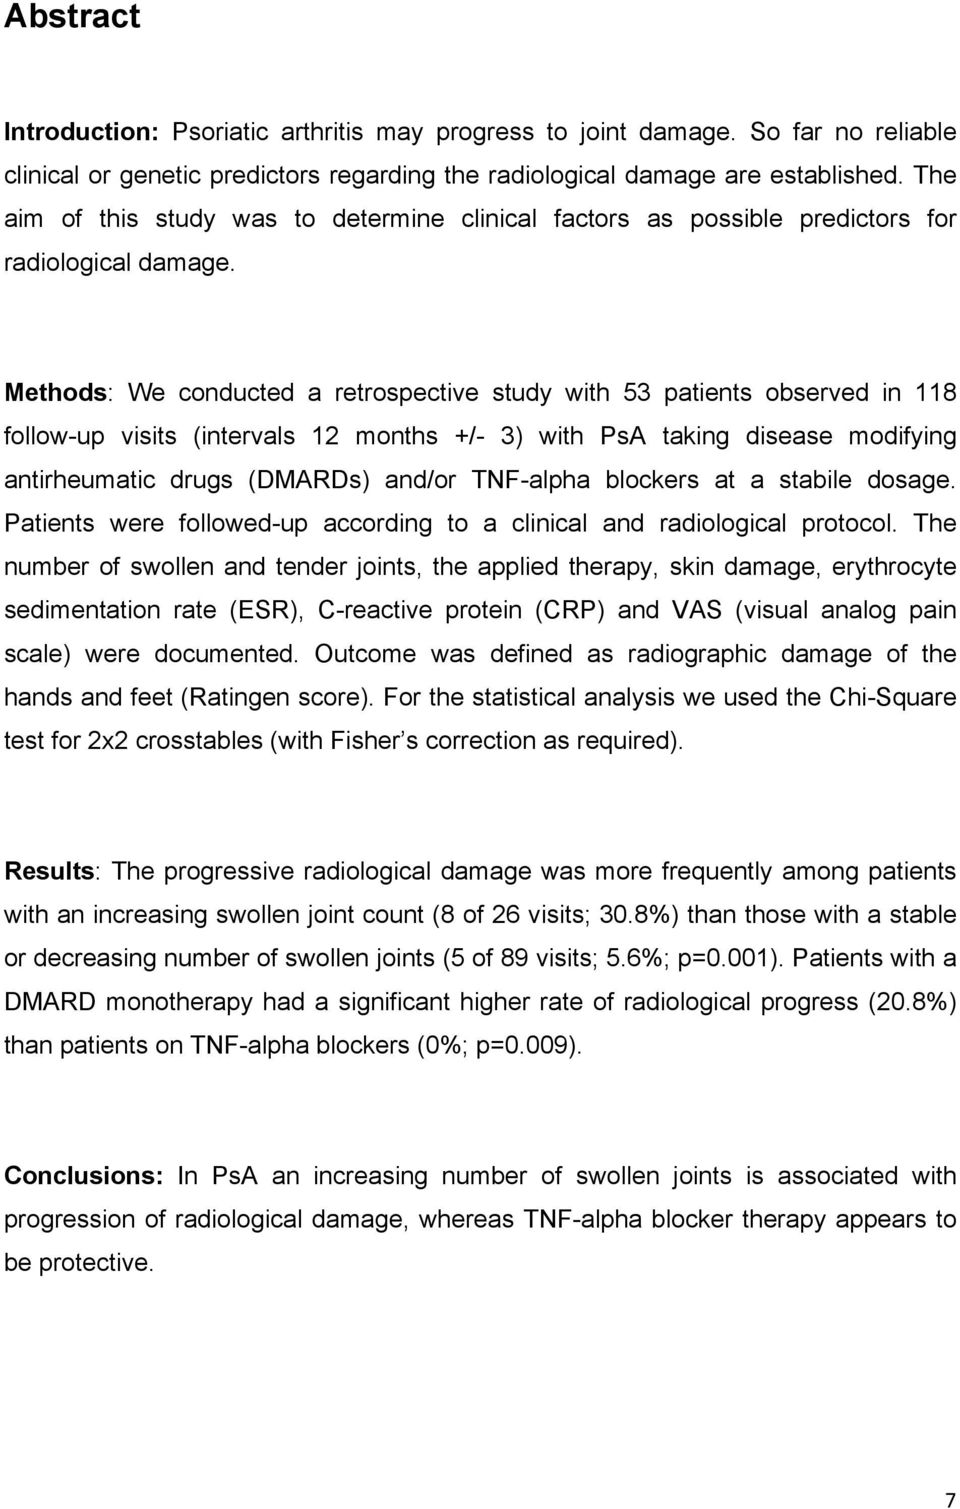 Methods: We conducted a retrospective study with 53 patients observed in 118 follow-up visits (intervals 12 months +/- 3) with PsA taking disease modifying antirheumatic drugs (DMARDs) and/or